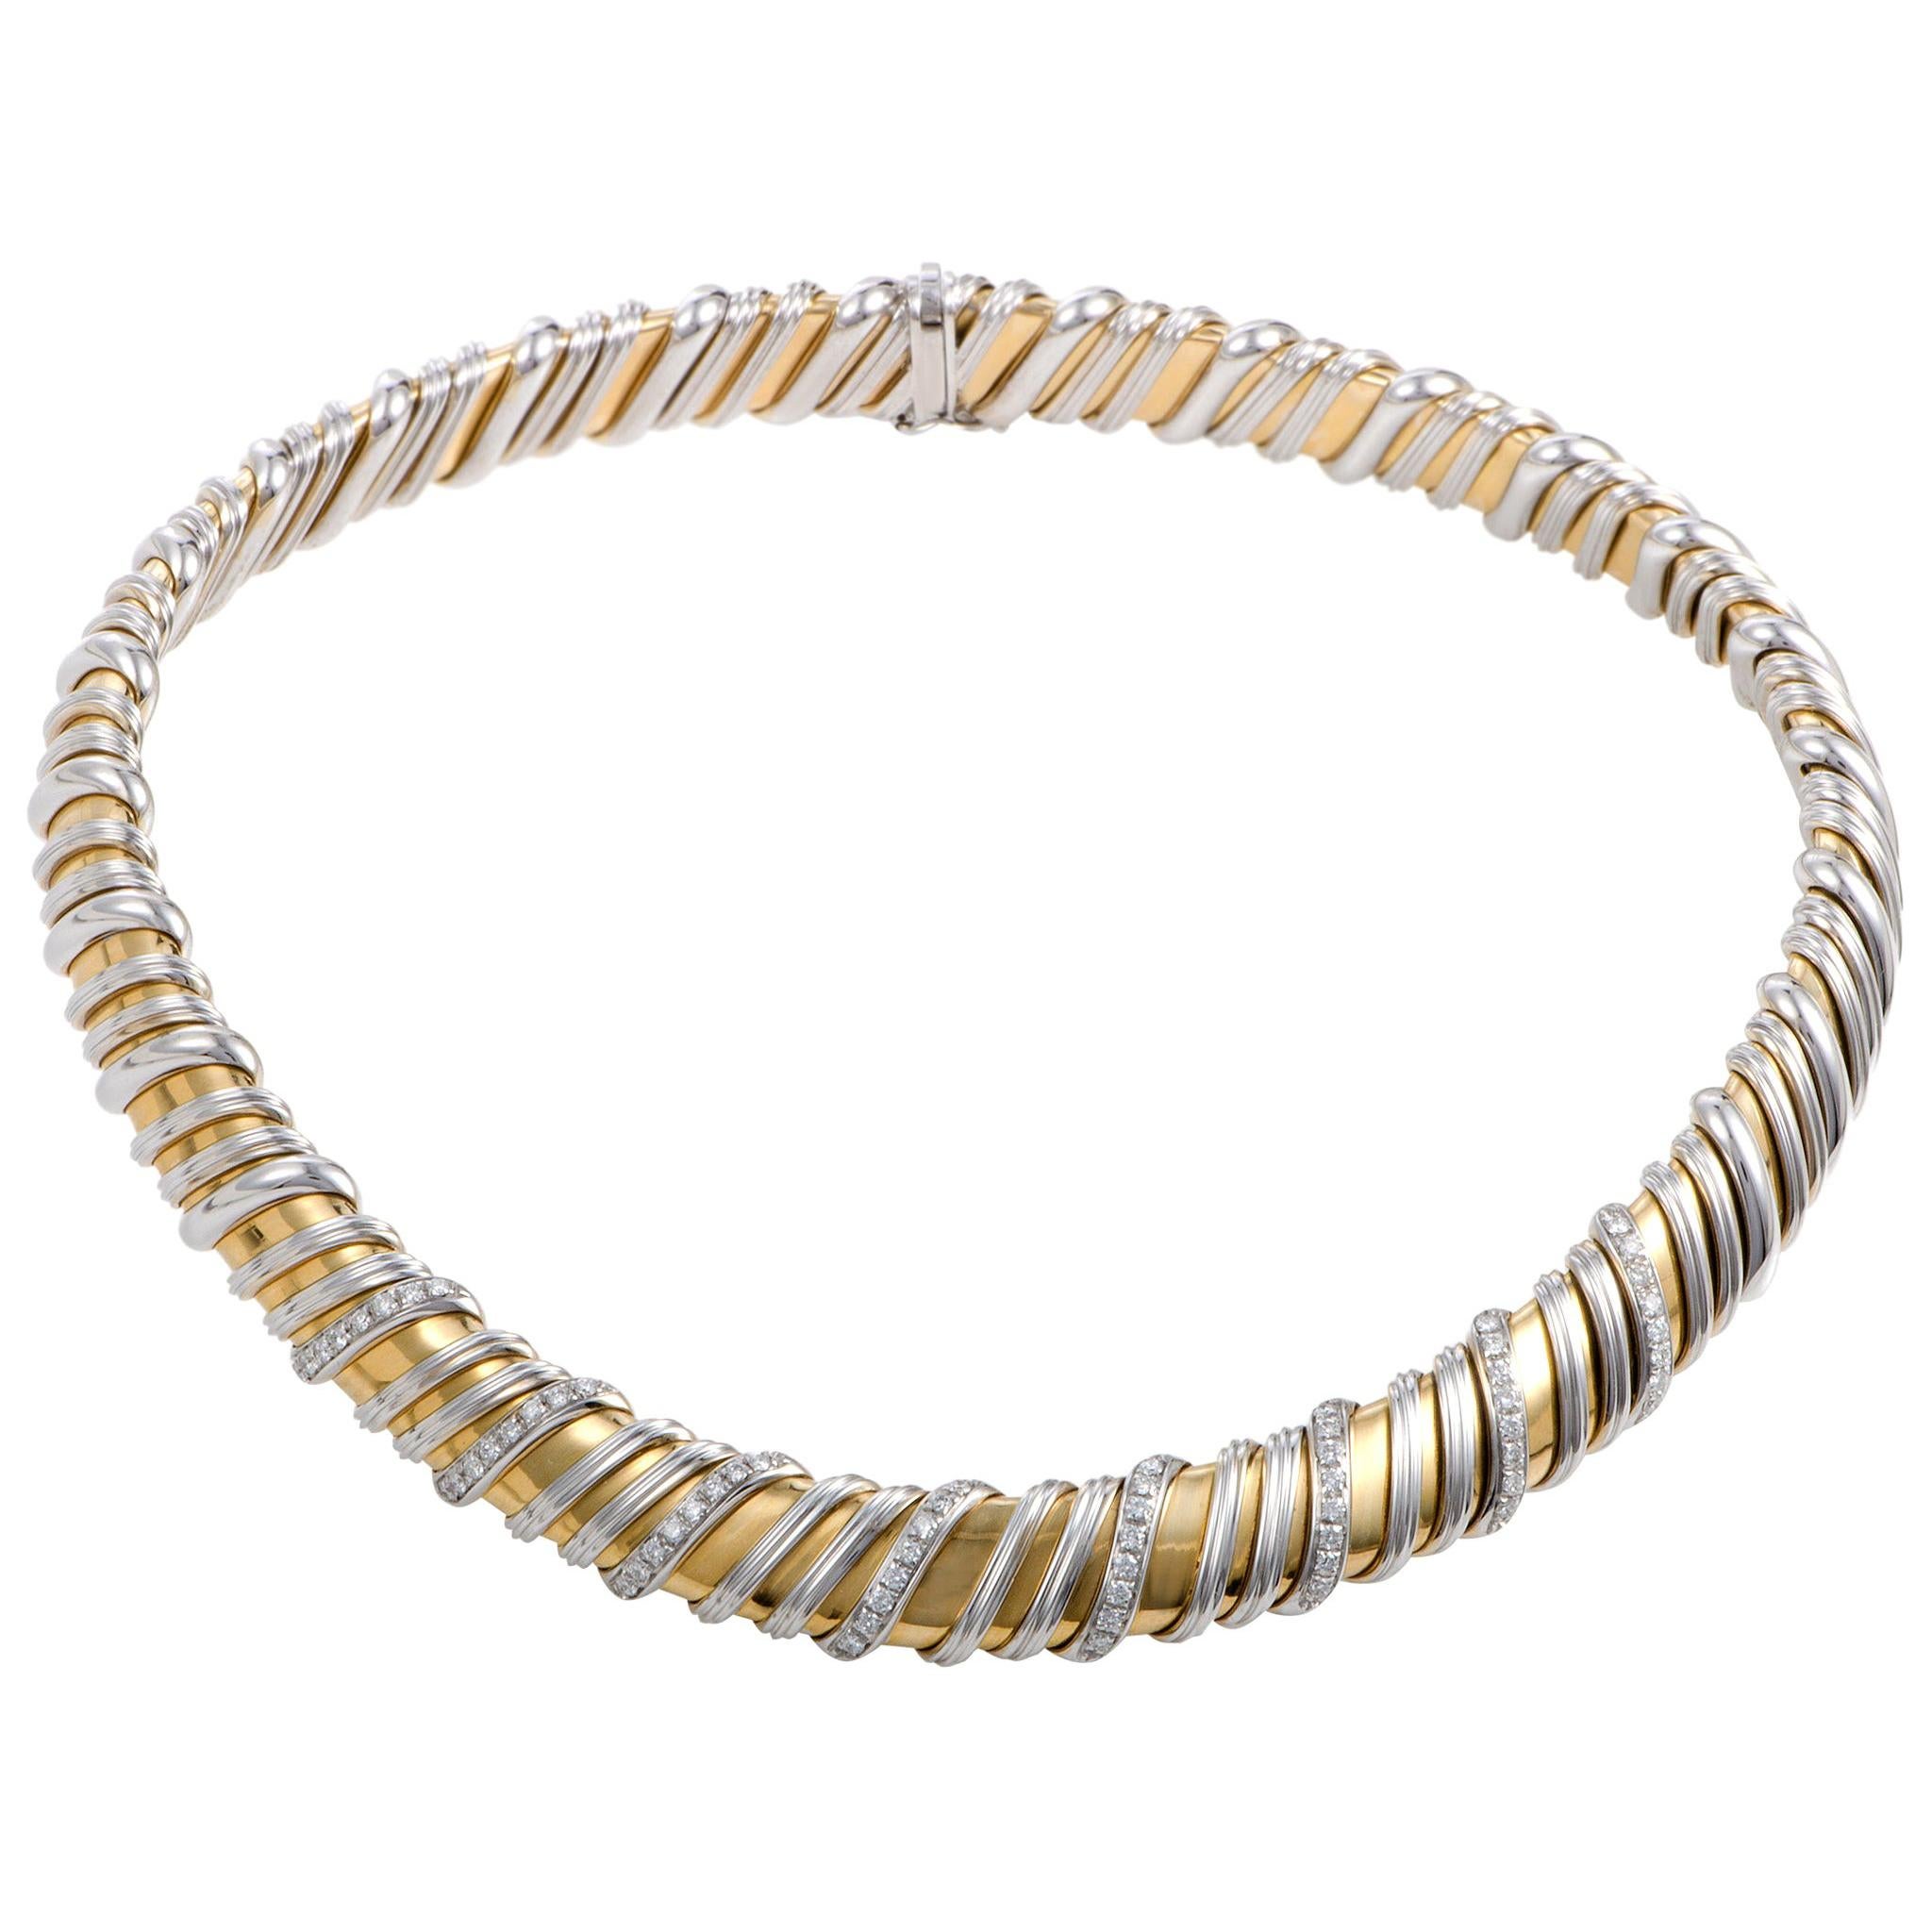 Roberto Coin Nabucco 1.14 Ct Diamond 18K White and Yellow Gold Choker Necklace